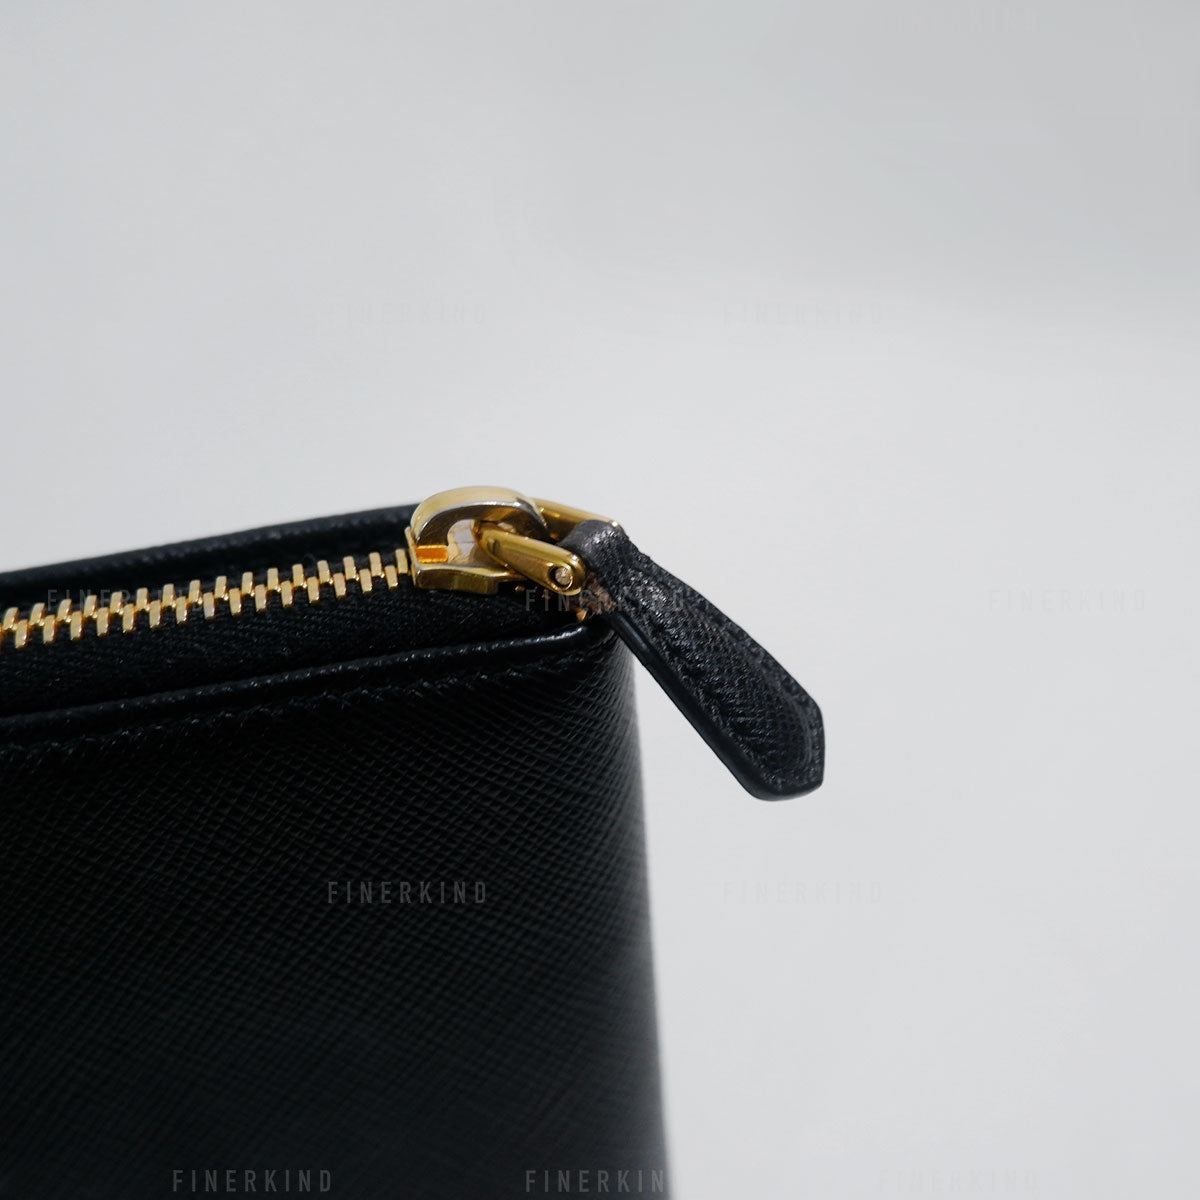 Black Saffiano Leather Compact Wallet